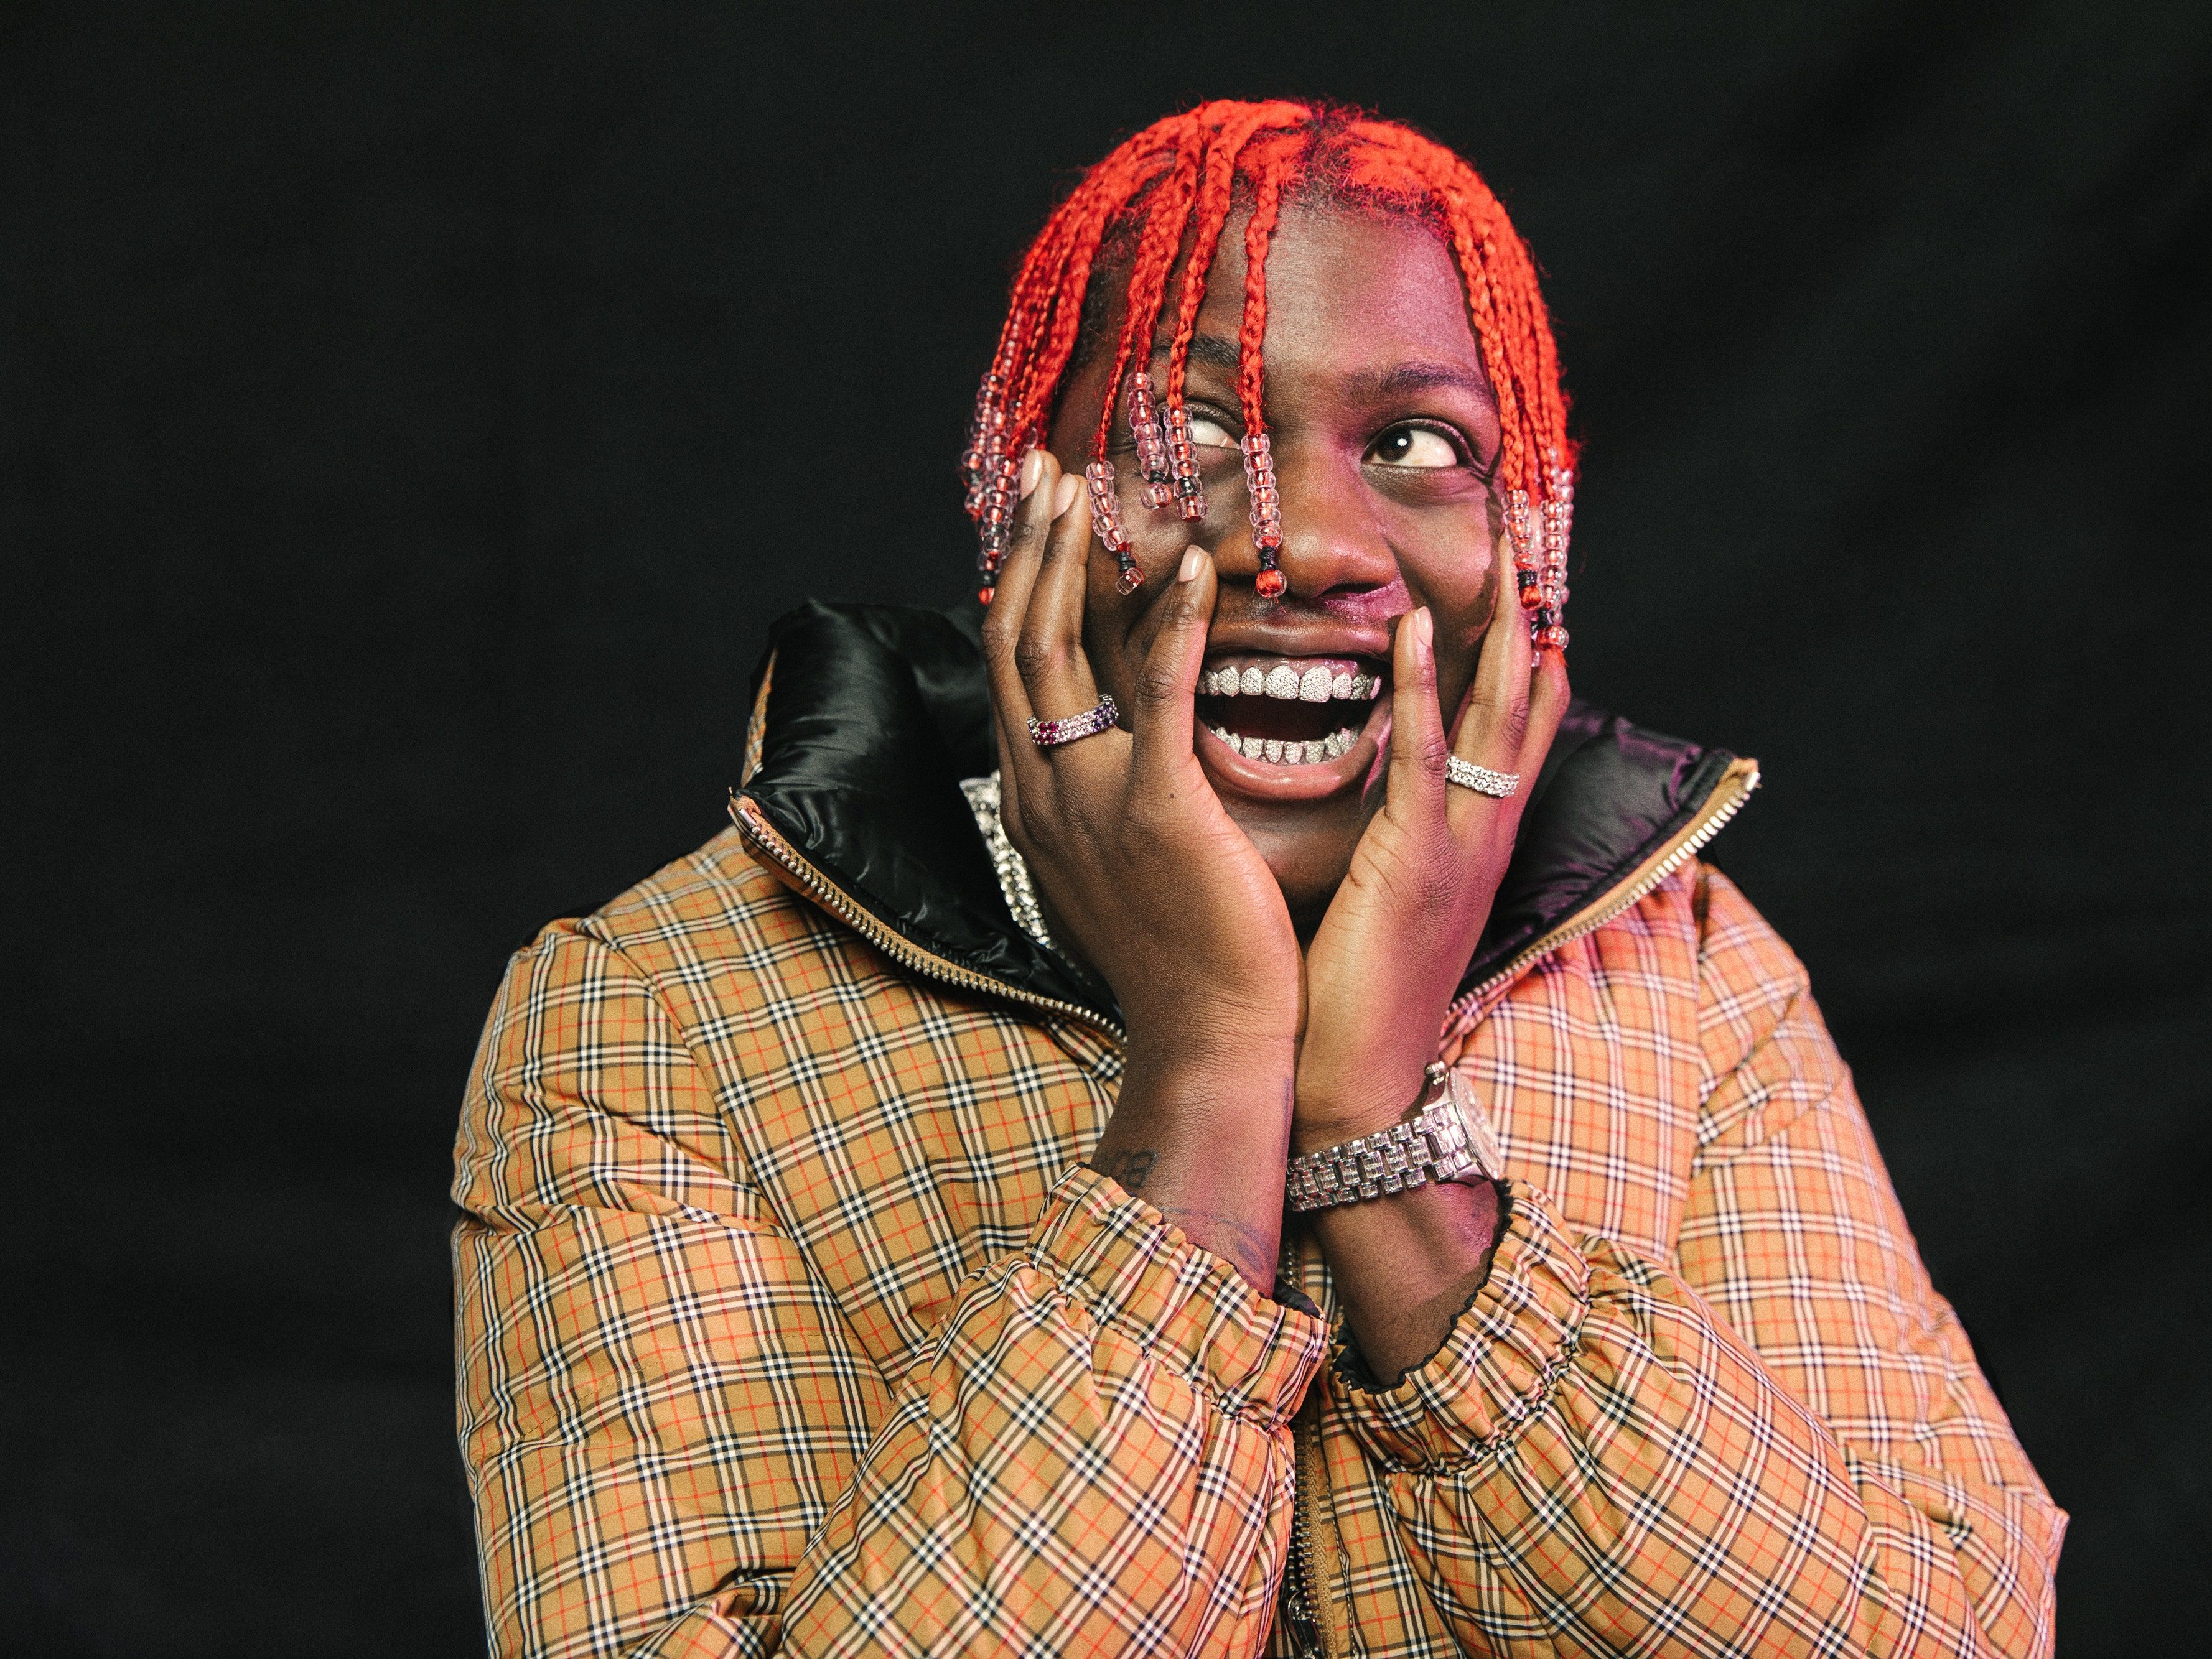 is lil yachty and lil boat the same person